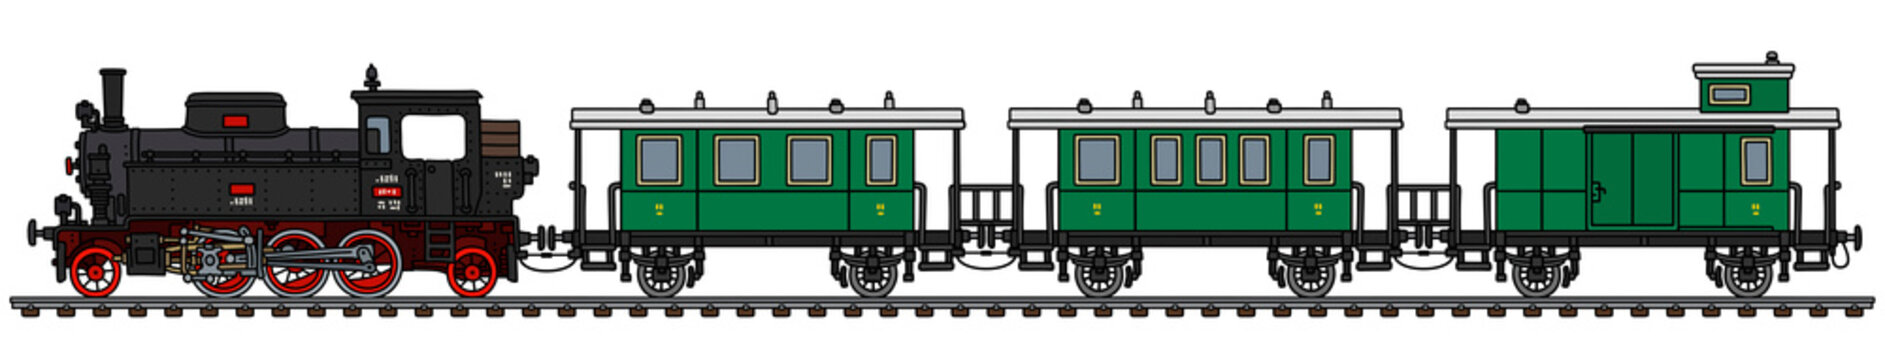 The vectorized hand drawing of a vintage passenger steam train